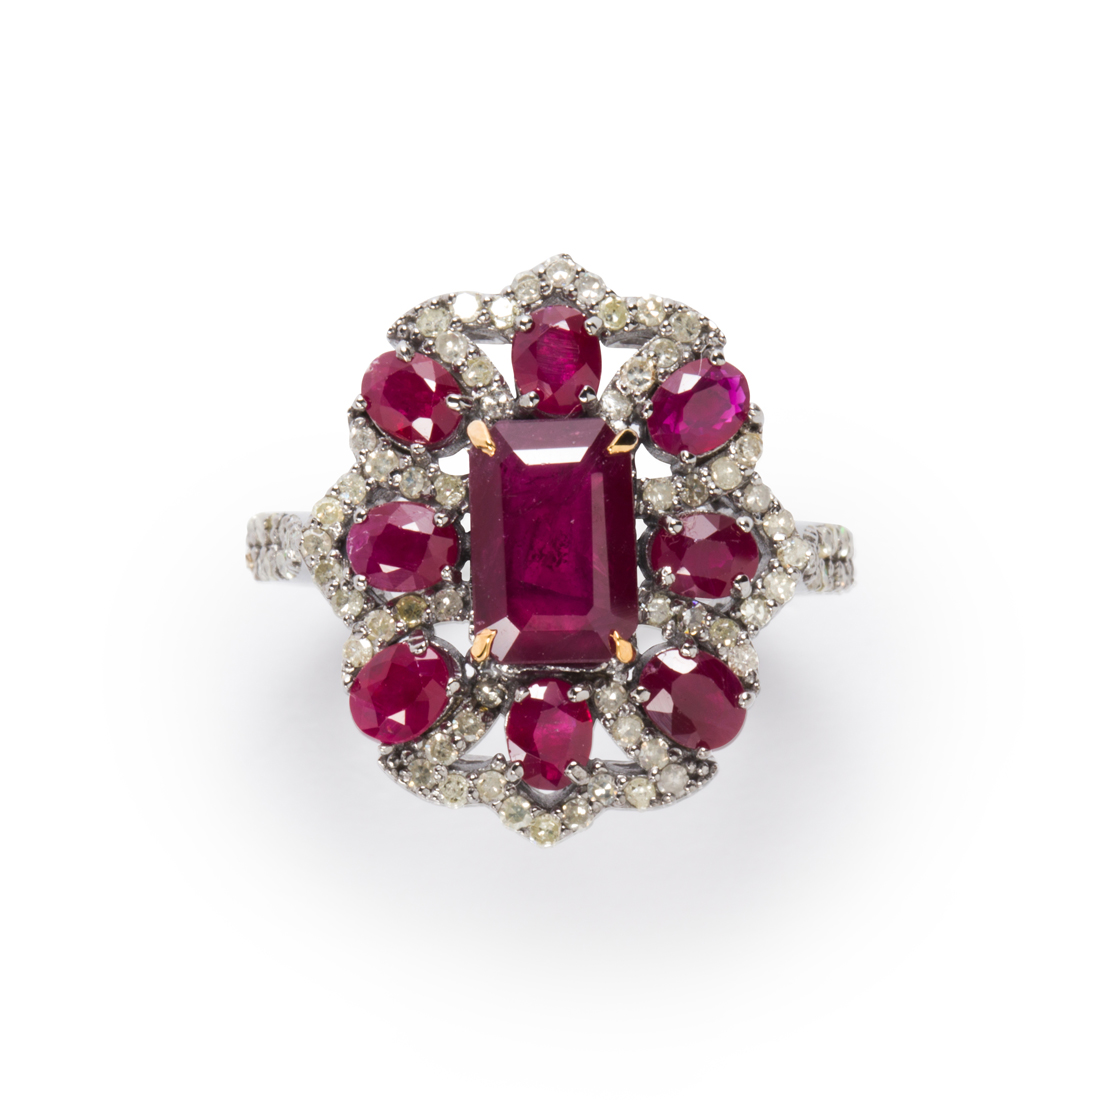 A RUBY AND DIAMOND RING A ruby